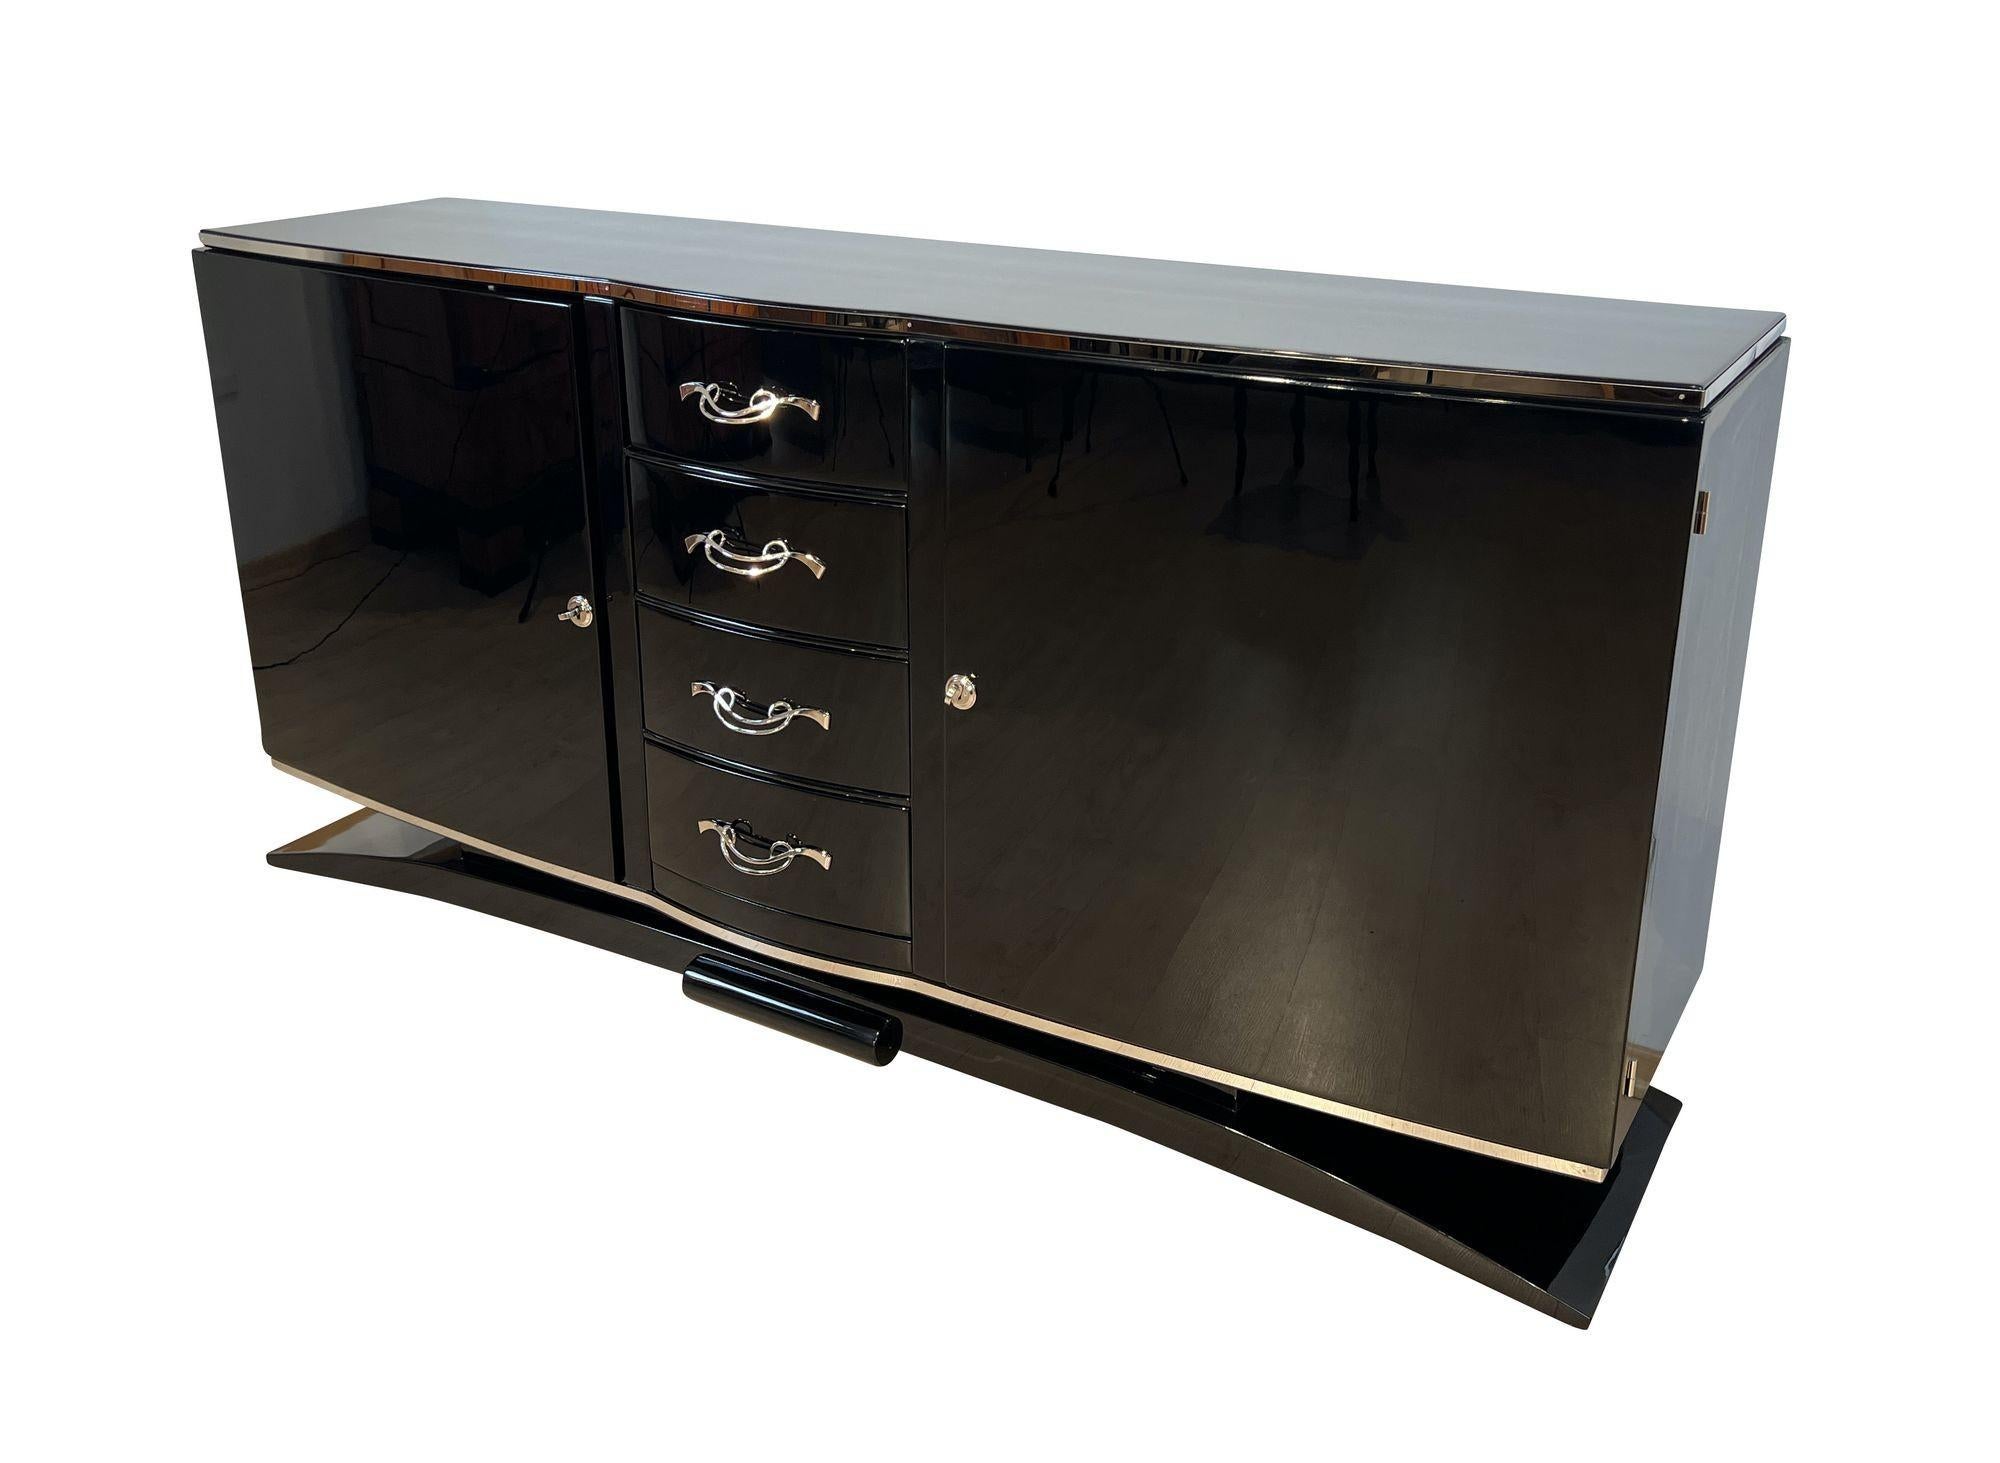 Large original Art Deco Sideboard of Buffet in black piano lacquer from France around 1930.
Black high gloss piano lacquer on walnut wood. Polished stainless steel trims running around the top and bottom of the body
Elegantly curved base that lifts